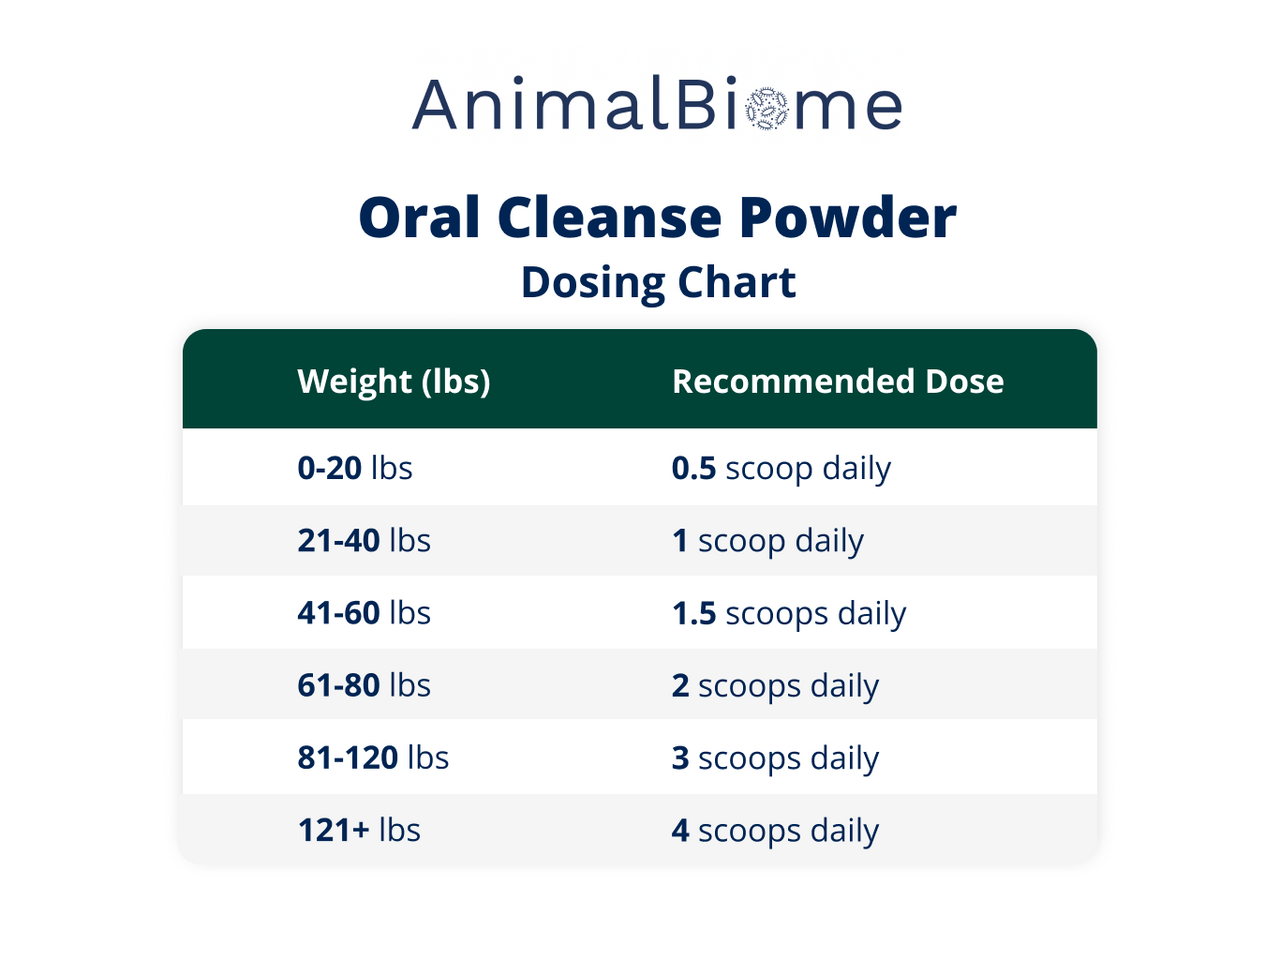 Oral Cleanse Powder Dosing Chart. 0-20 lbs = 0.5 scoop daily. 21-40 lbs = 1 scoop daily. 41-60 lbs = 1.5 scoops daily. 61-80 lbs = 2 scoops daily. 81-120 lbs = 3 scoops daily. 121+ lbs = 4 scoops daily.